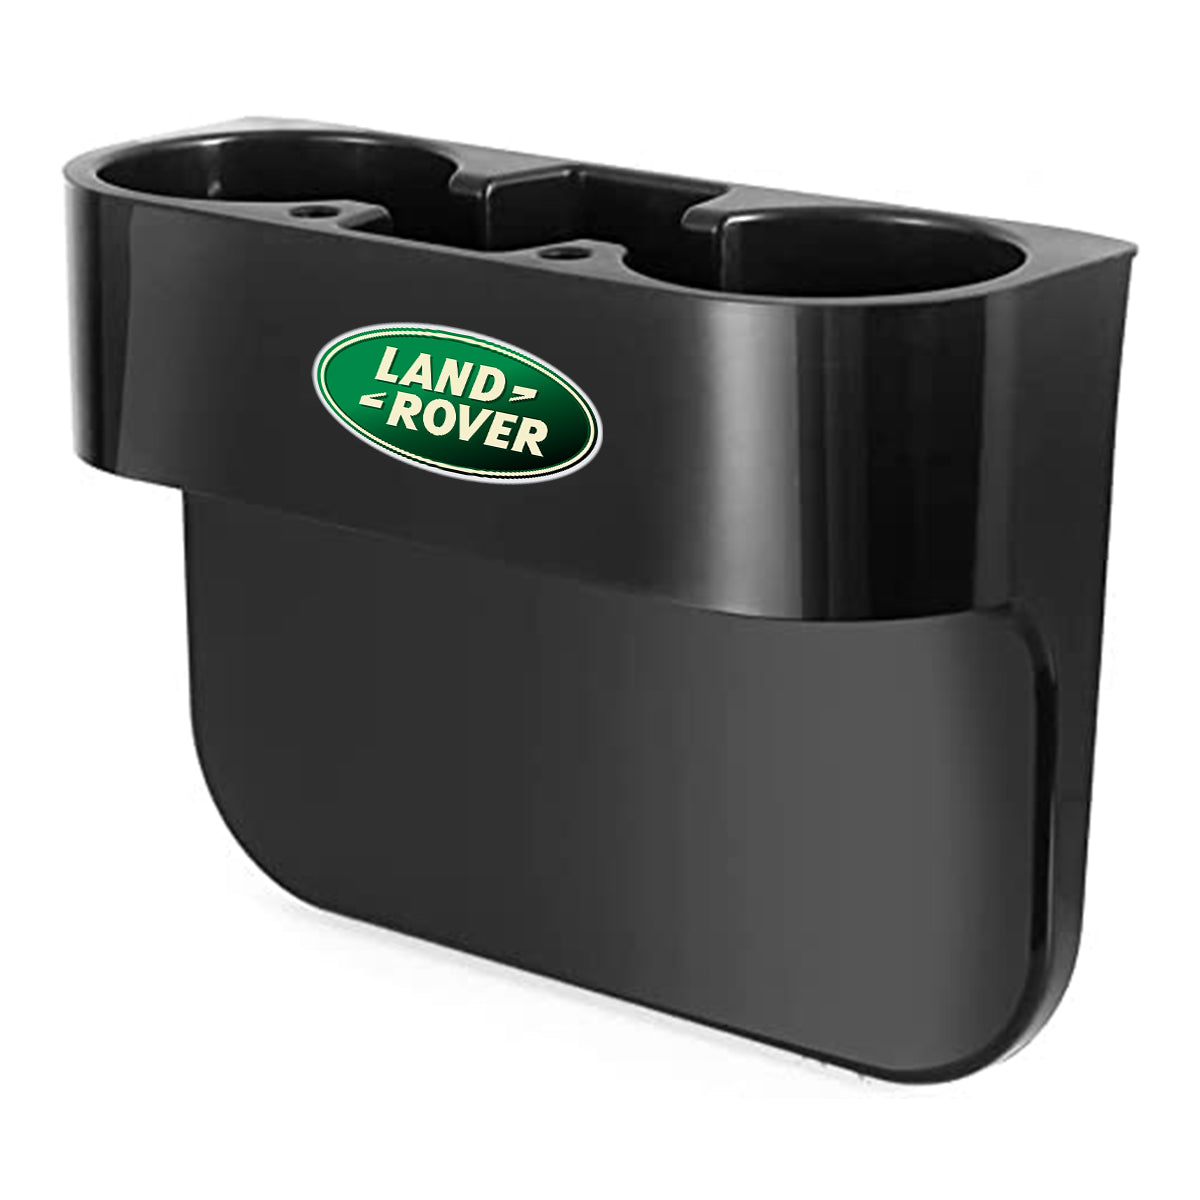 Land Rover Car Cup Holder: Convenient and Secure Beverage Storage for Your Vehicle